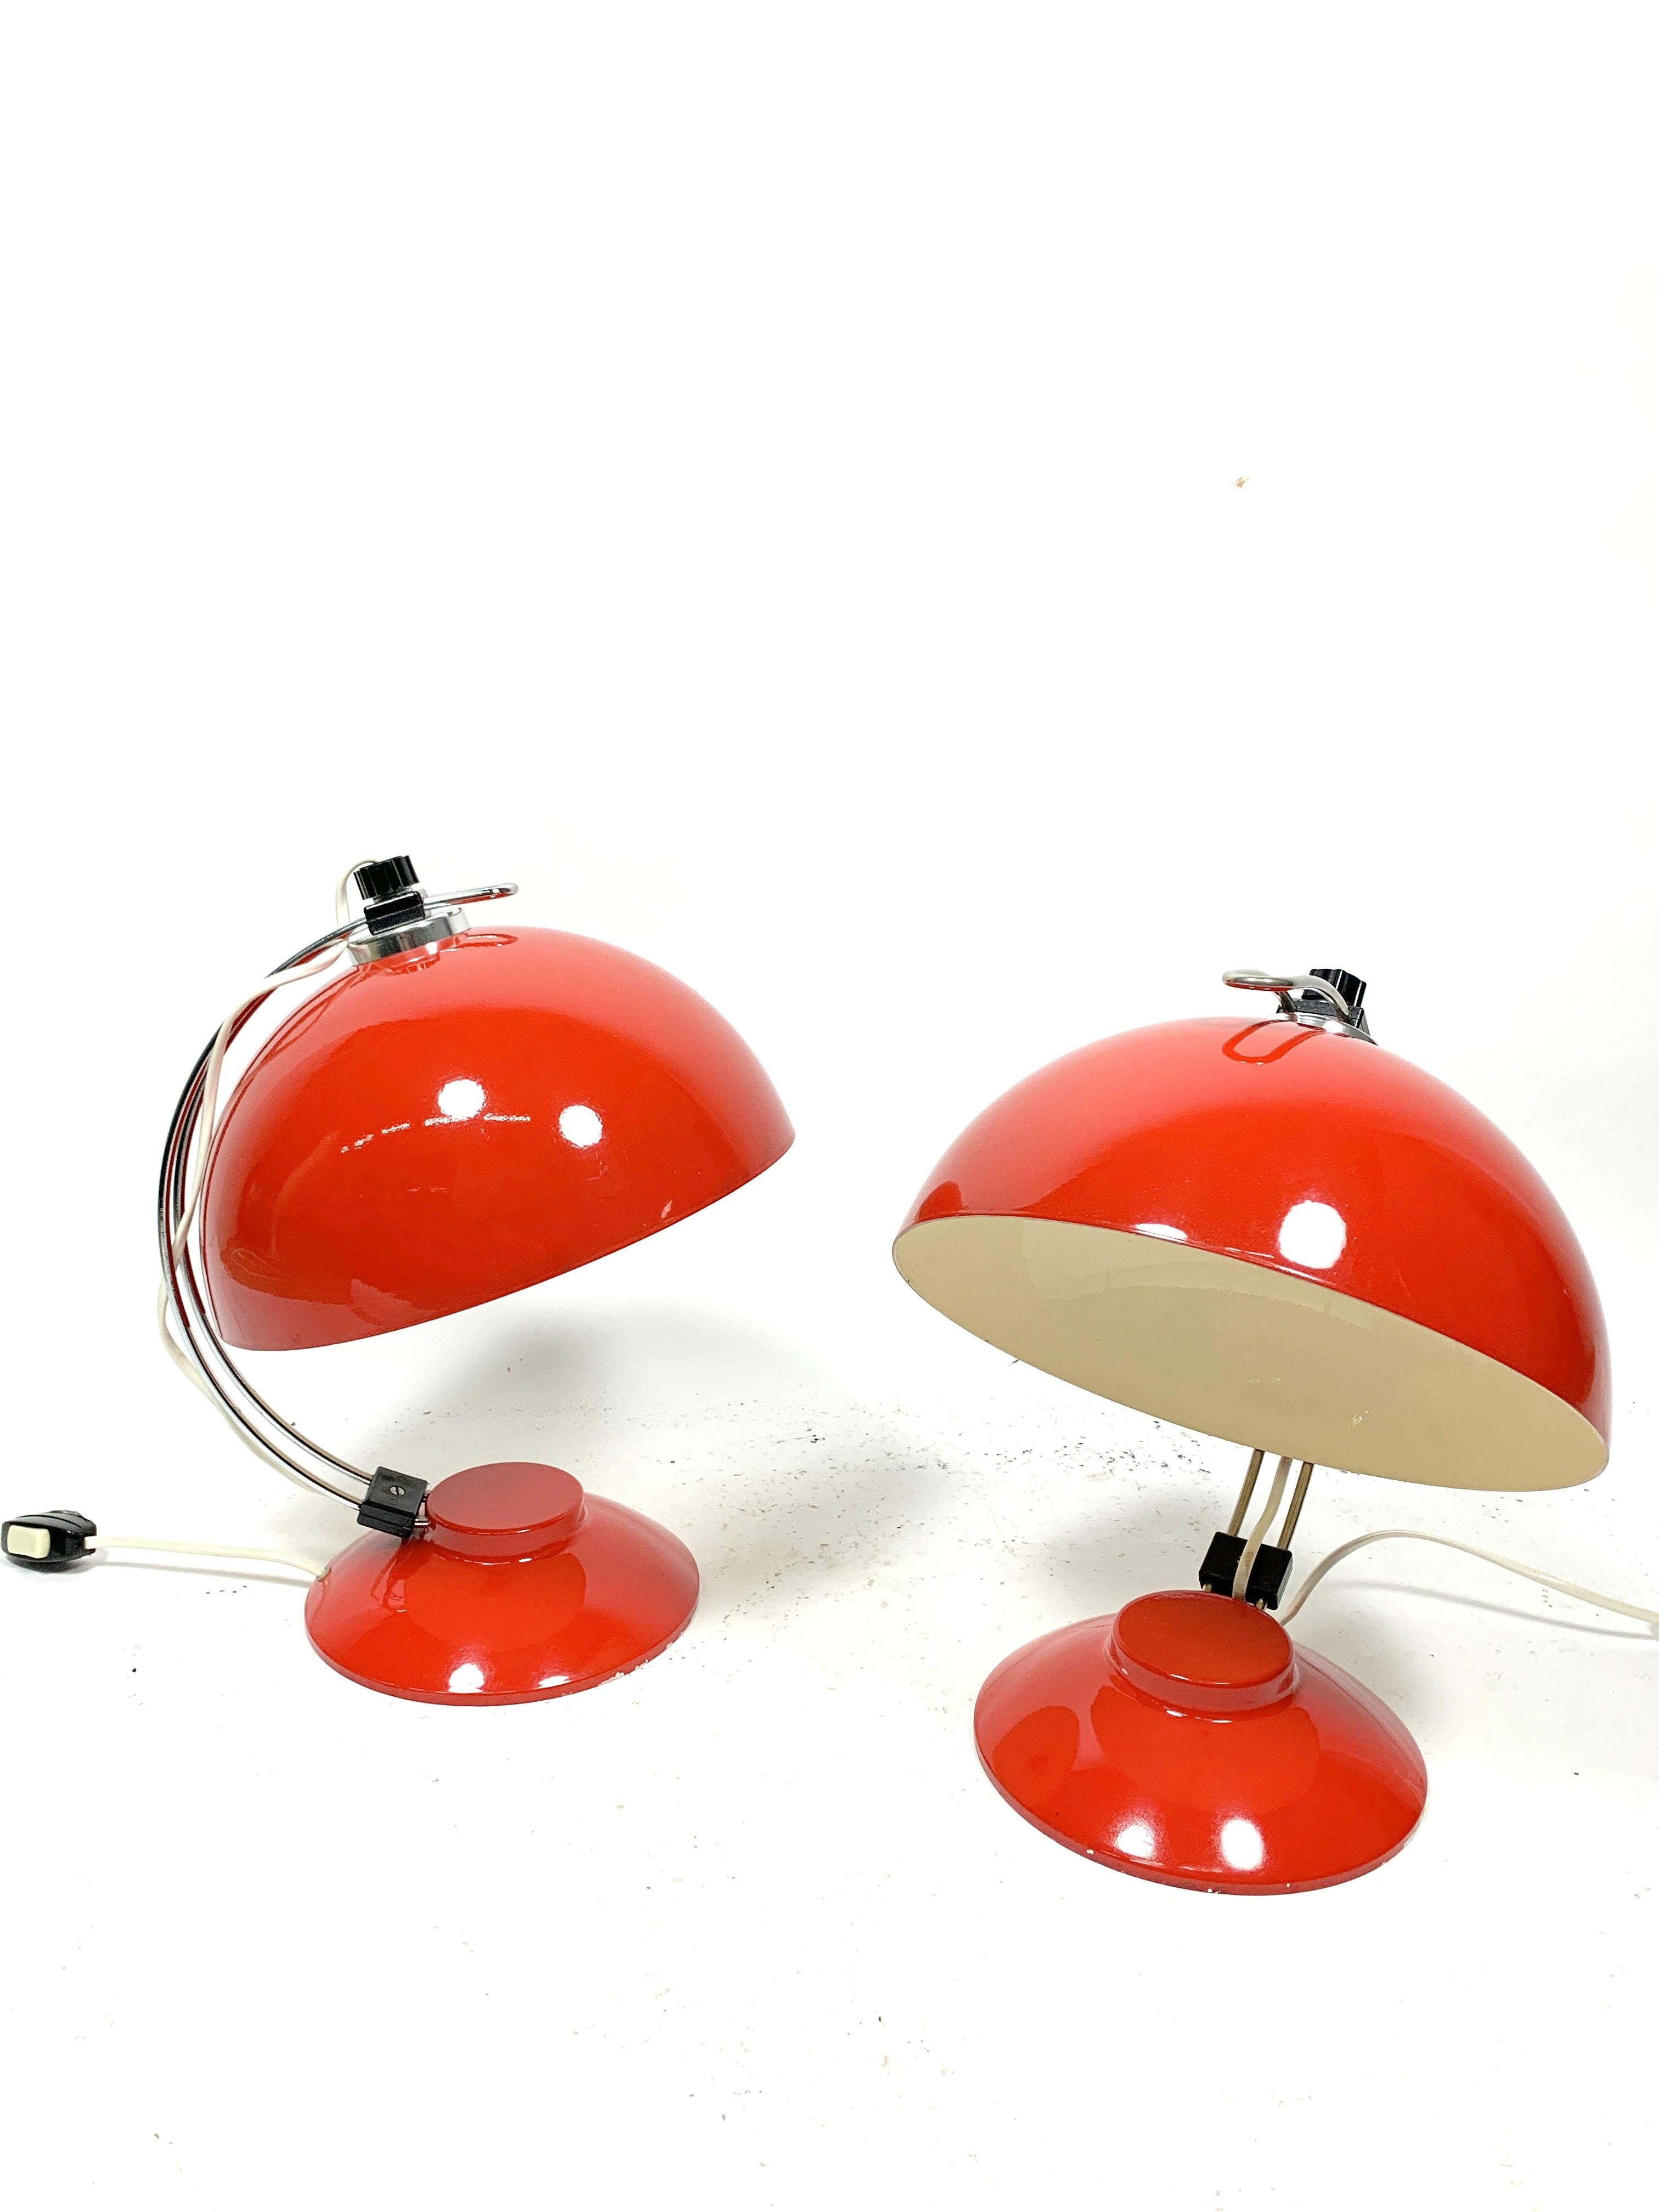 This pair of painted red Space Age lamps, is in good condition. It has a chrome-plated tubular frame and black plastic accessories.
Rare in pairs, they're great decorative additions to any interior.